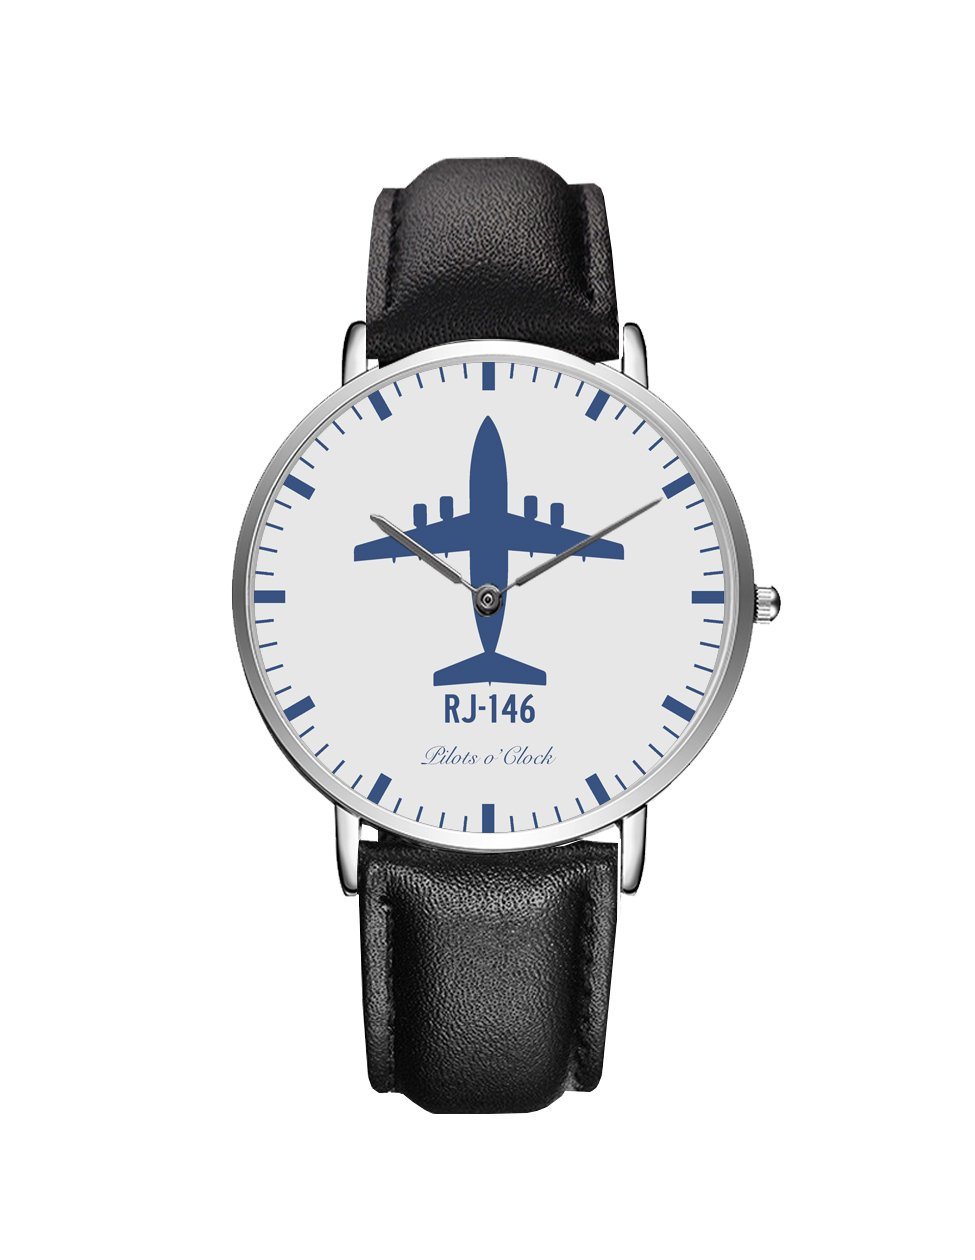 British Aerospace BAe RJ-146 Leather Strap Watches Pilot Eyes Store Silver & Black Leather Strap 